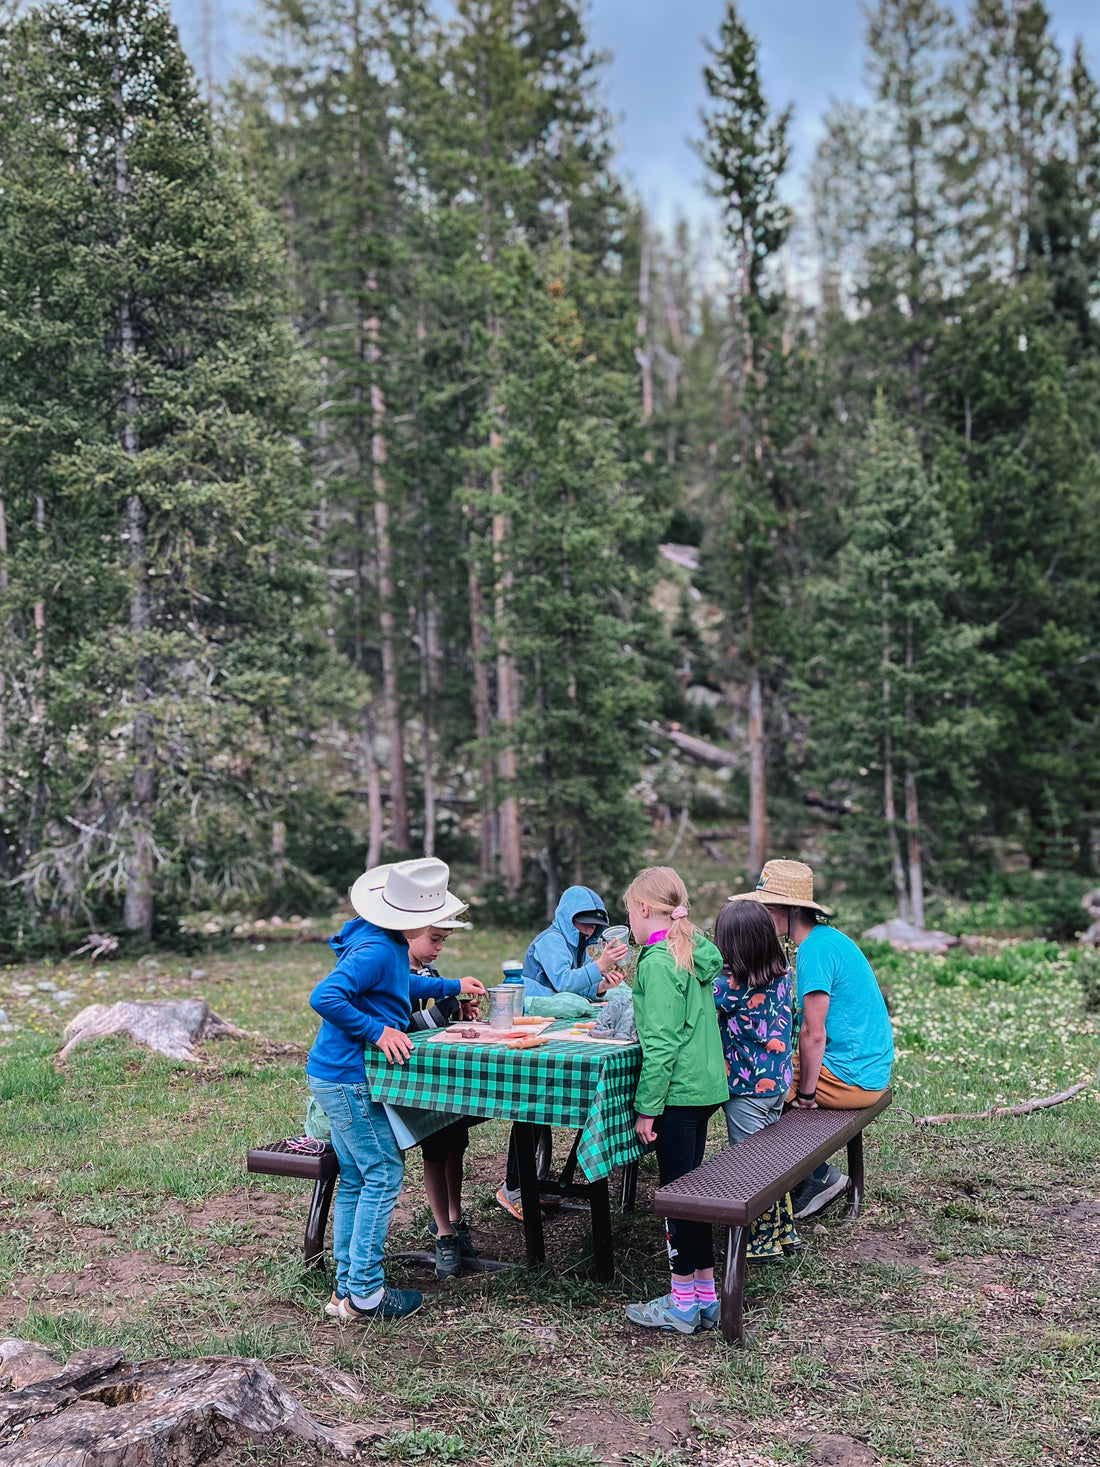 Campers gather at a picnic table for a camp activity in the mountains.